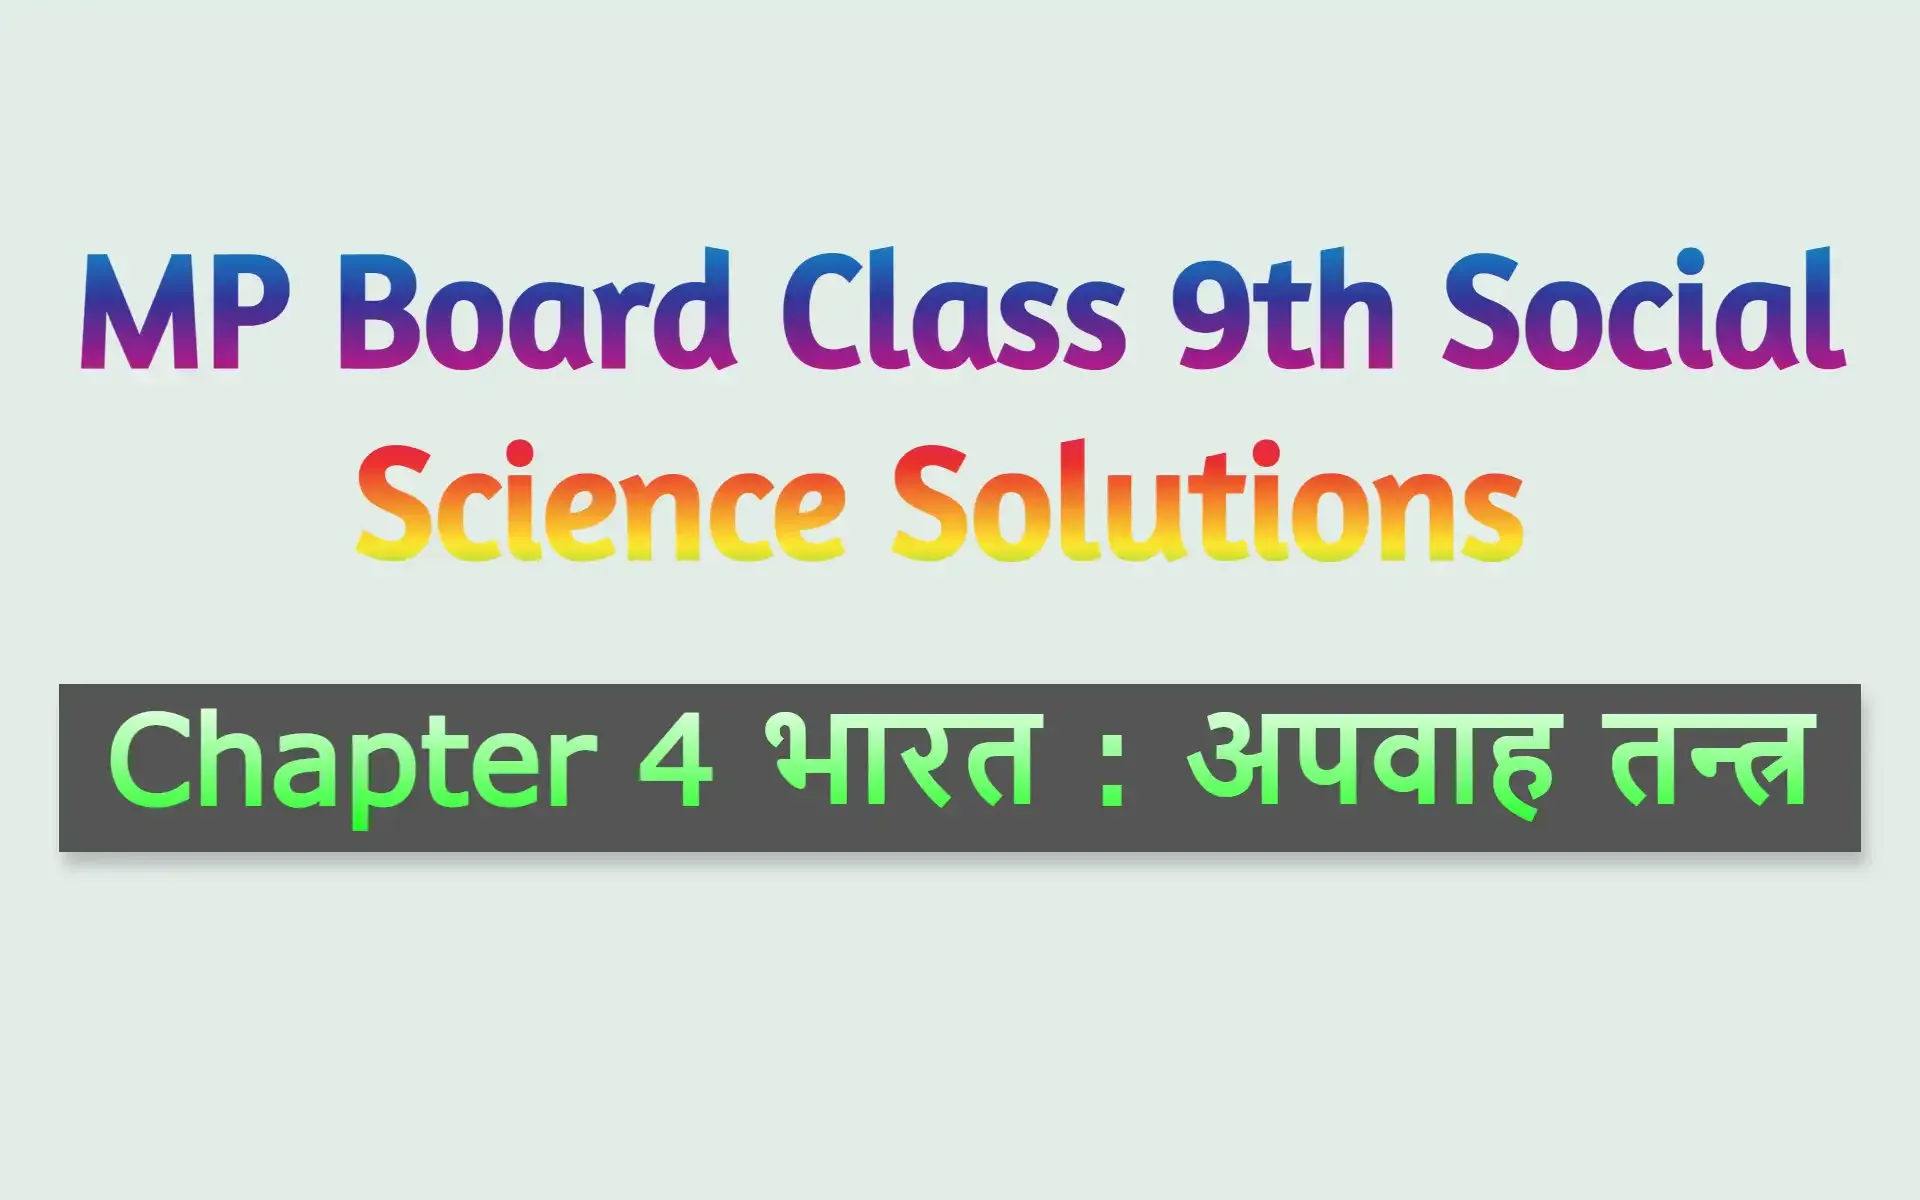 MP Board Class 9th Social Science Solutions Chapter 4 भारत : अपवाह तन्त्र